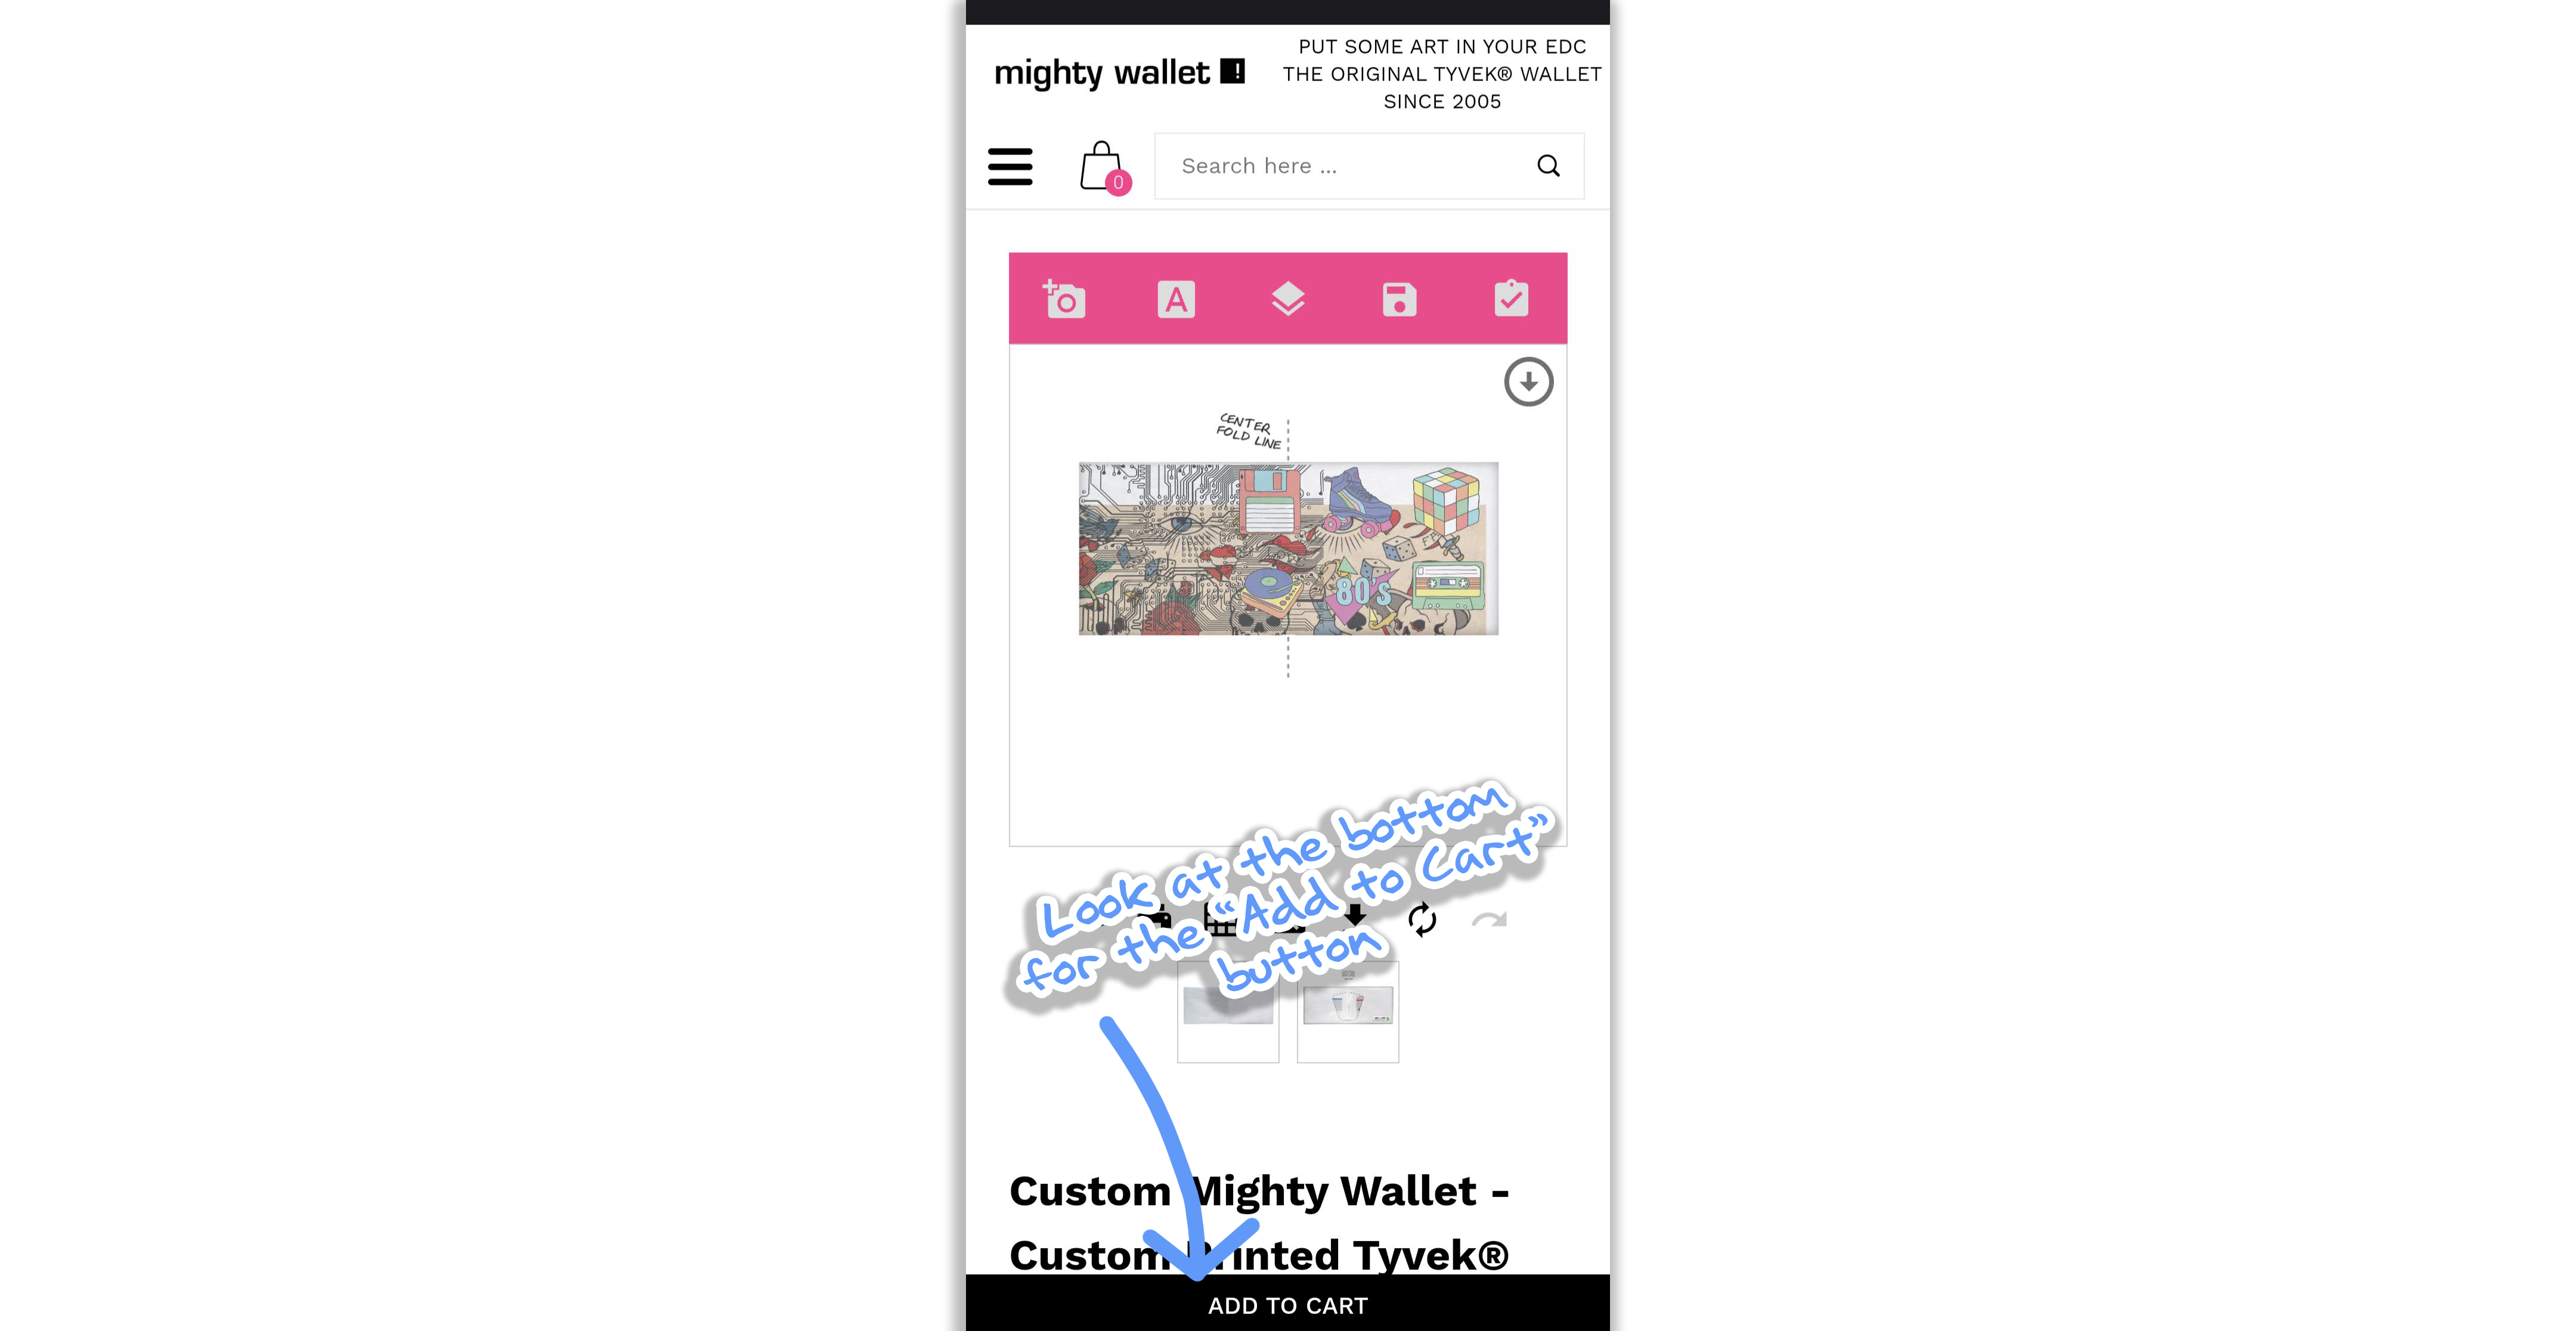 mobile custom mighty wallet layout button hidden at bottom copy.png